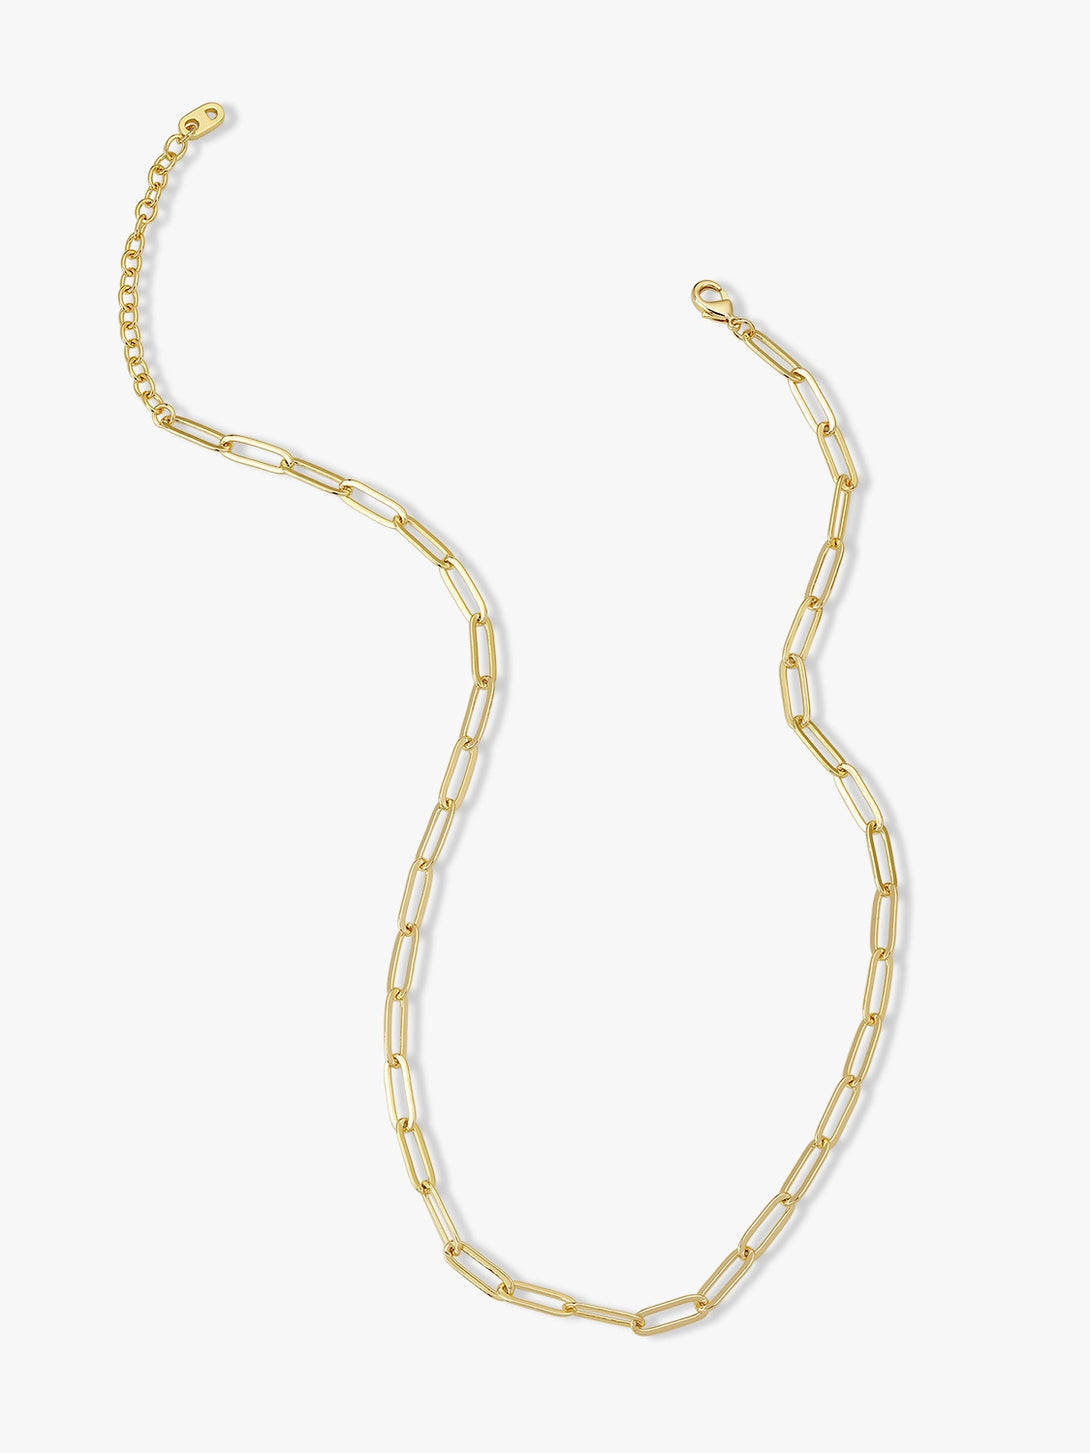 Unisex Bold Chain Necklace - OOTDY